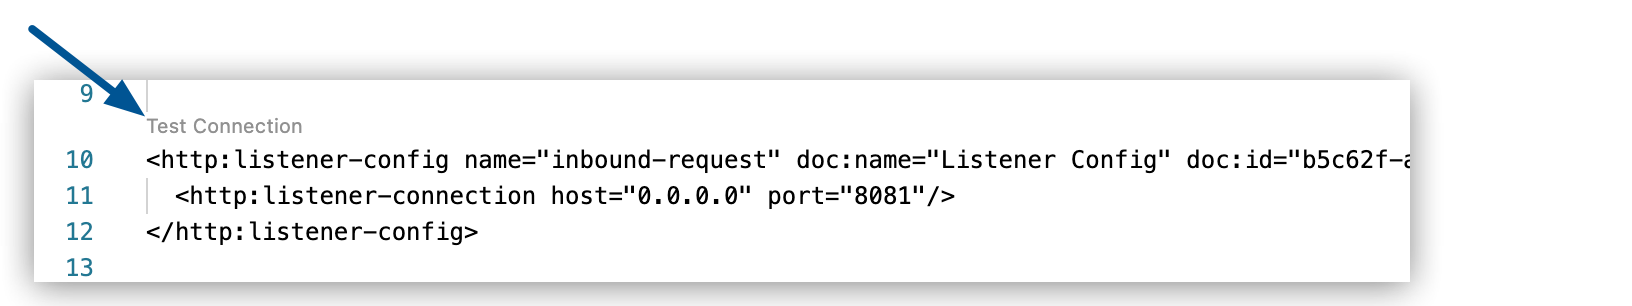 HTTP Listener Test Connection link in the configuration XML